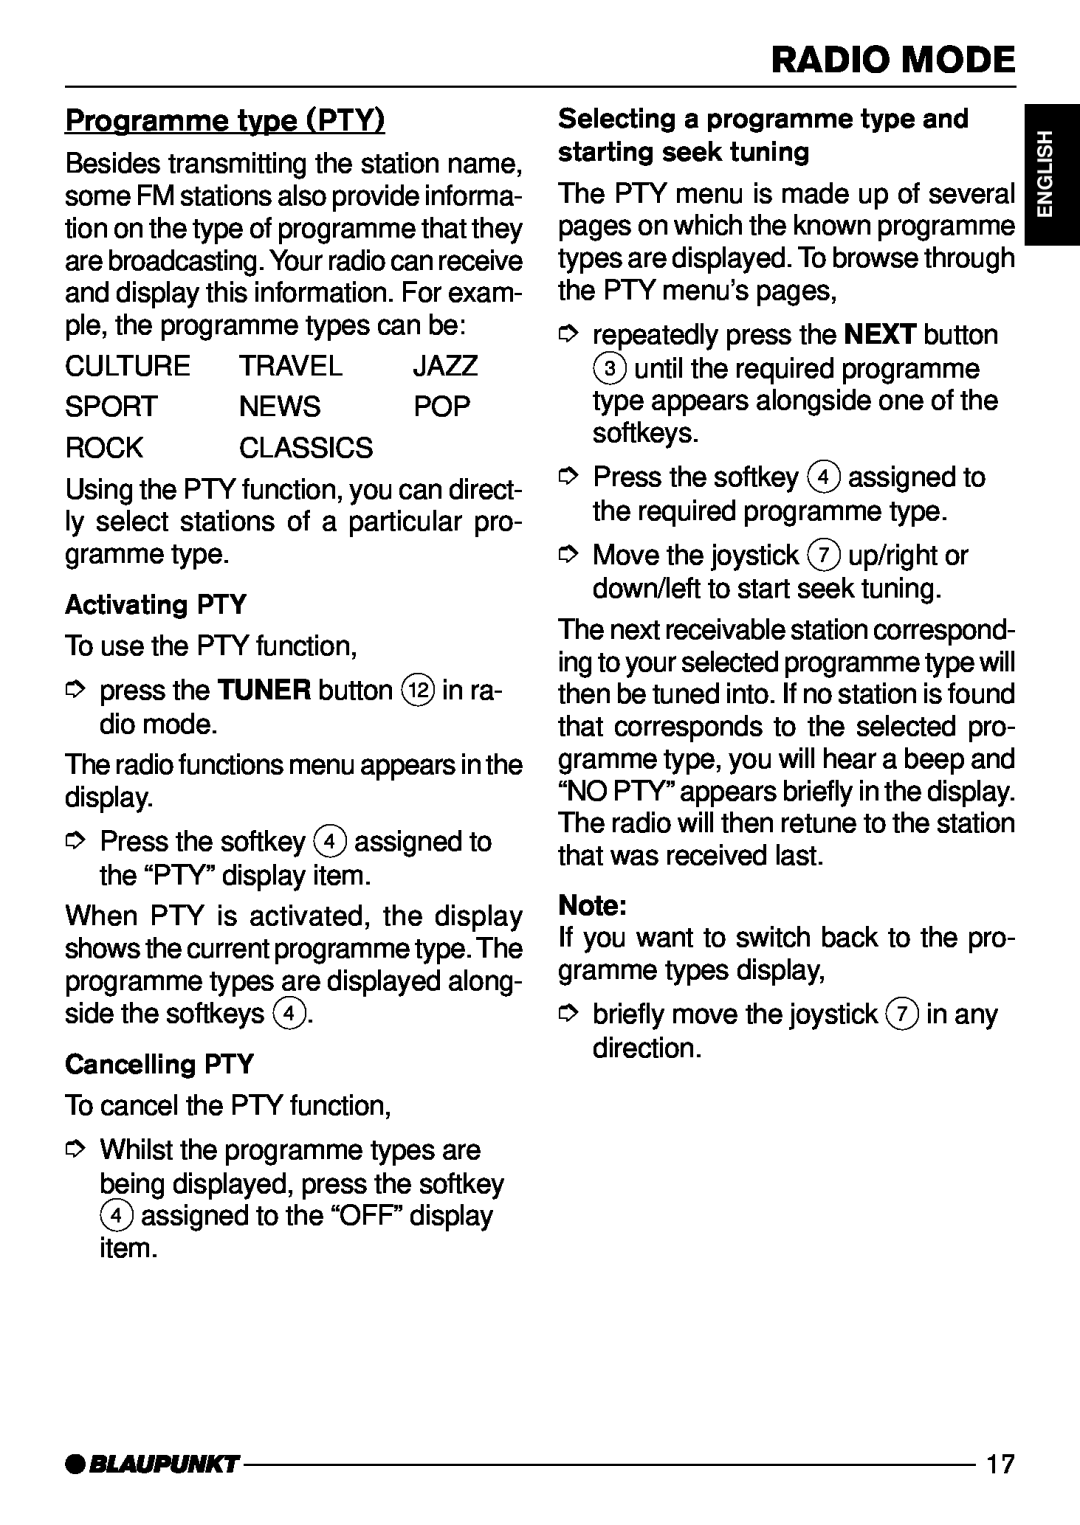 Blaupunkt CD74, CD73 operating instructions Programme type PTY, Radio Mode, Activating PTY, Cancelling PTY 